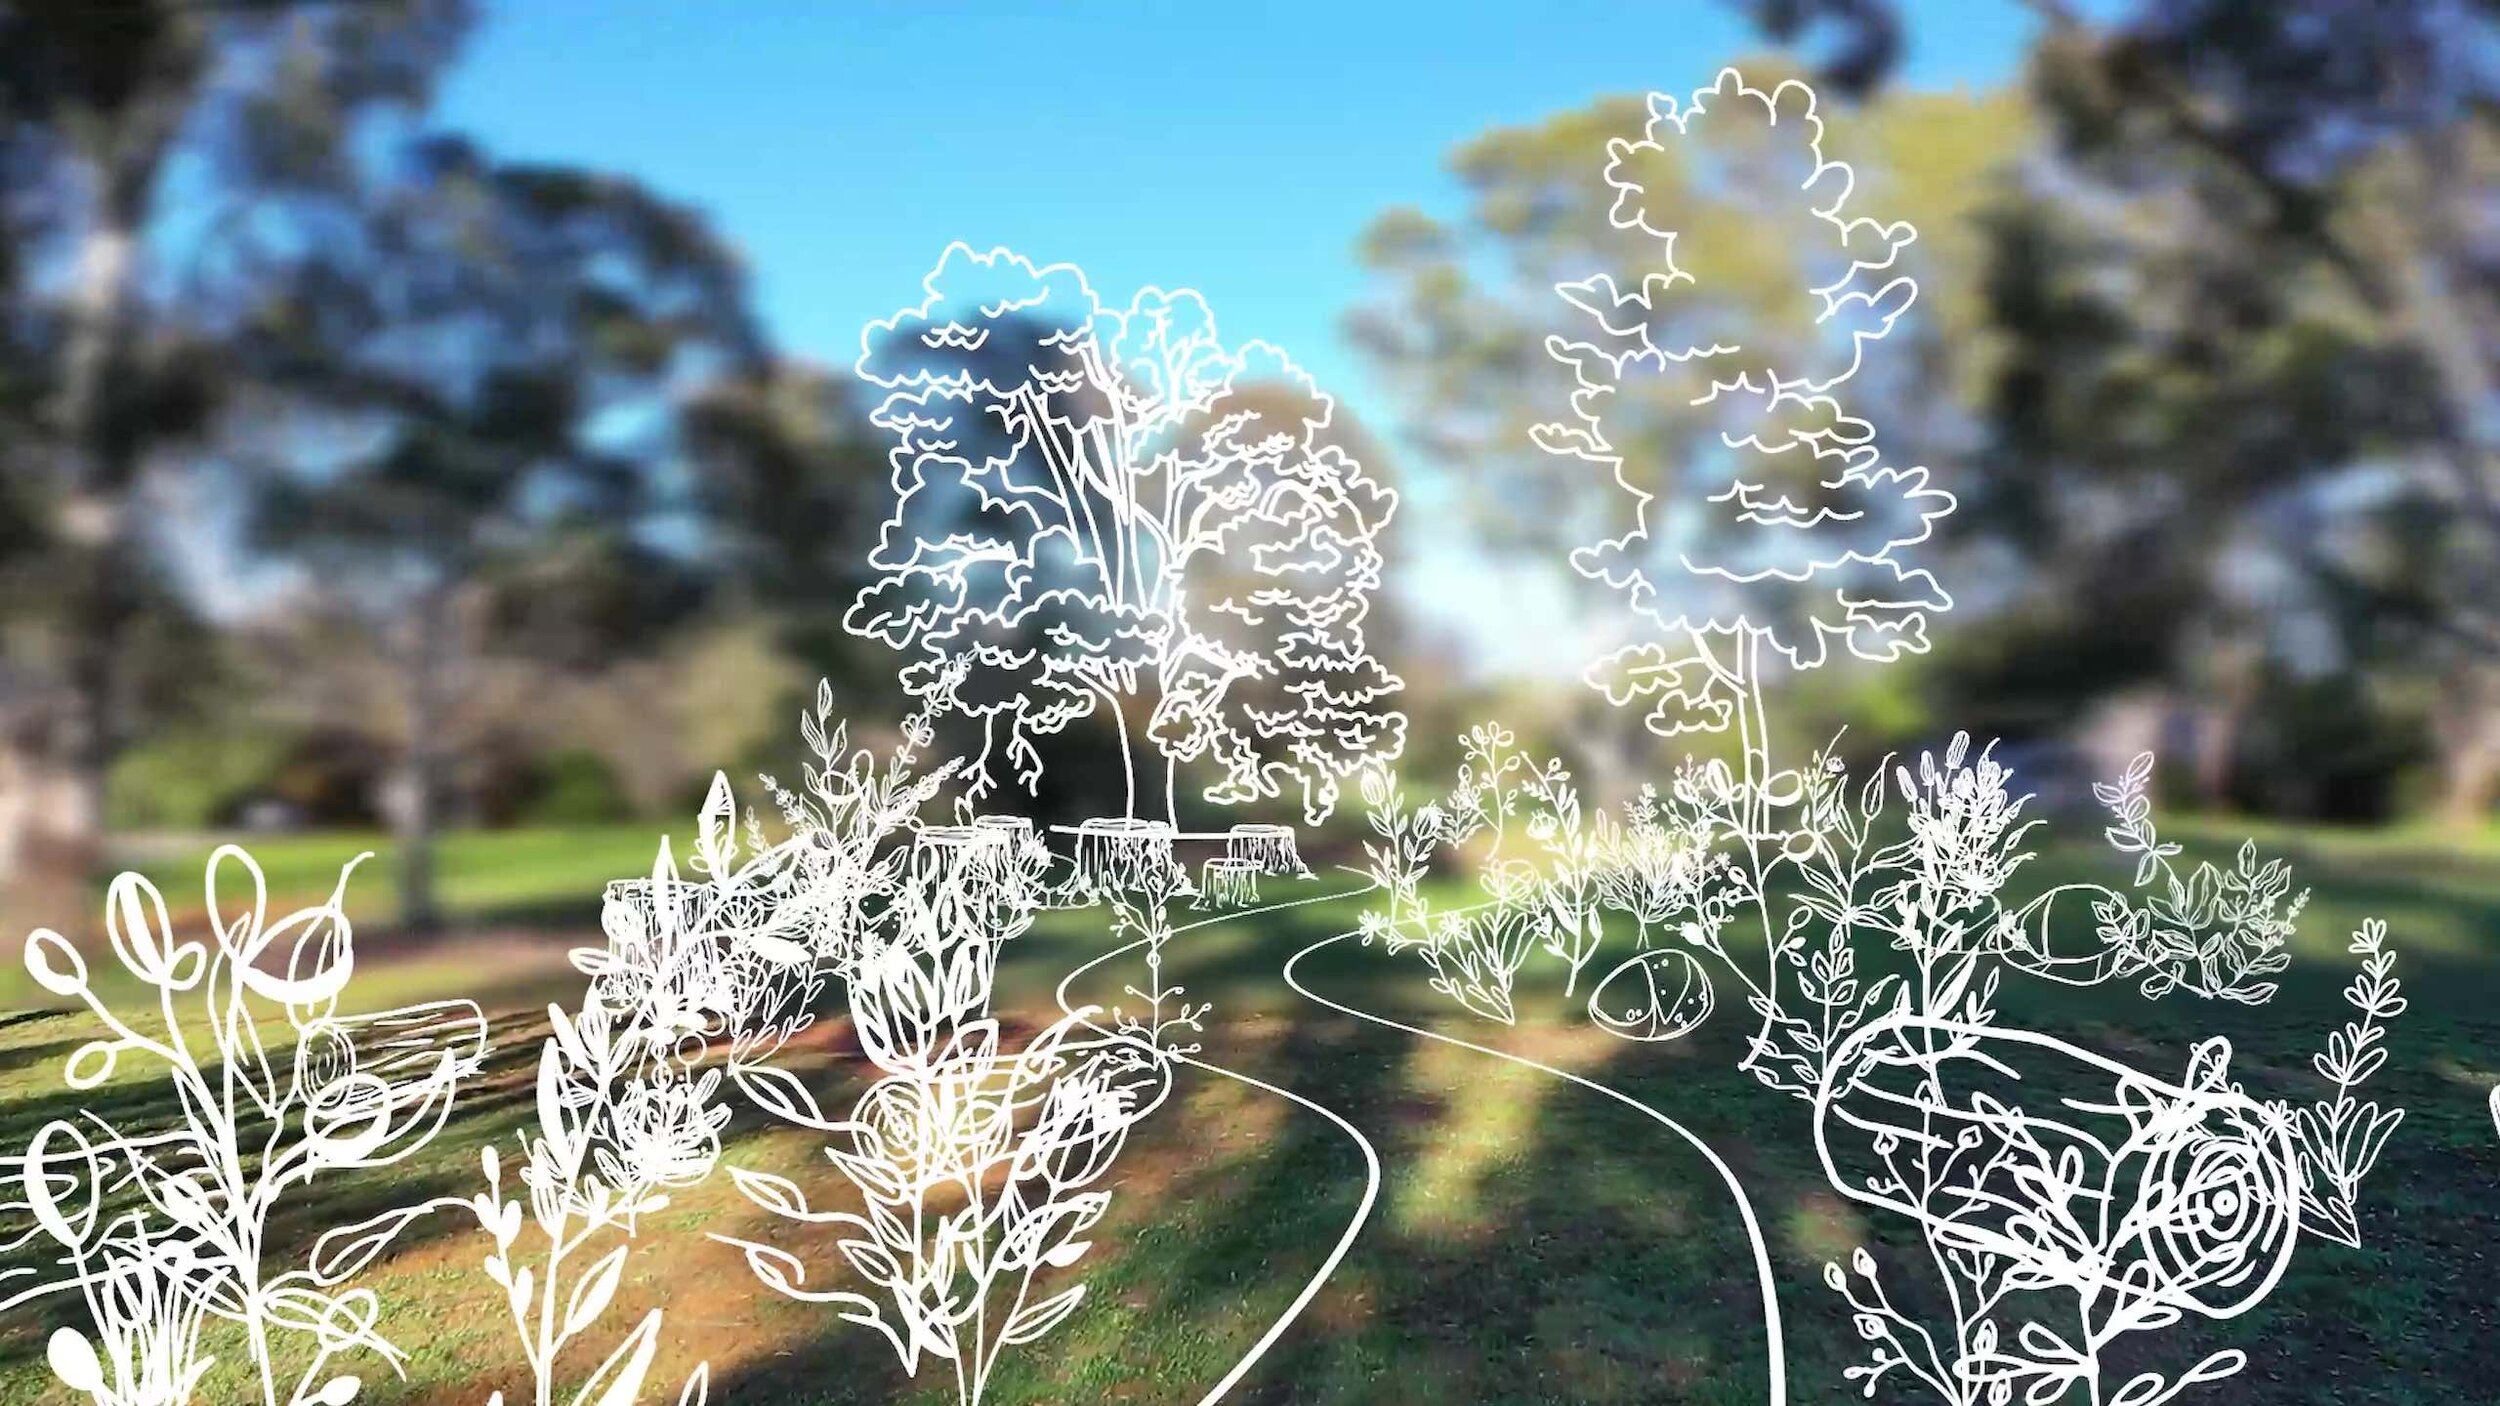 GOST_Watson Micro-Forest_animation-trees.jpg